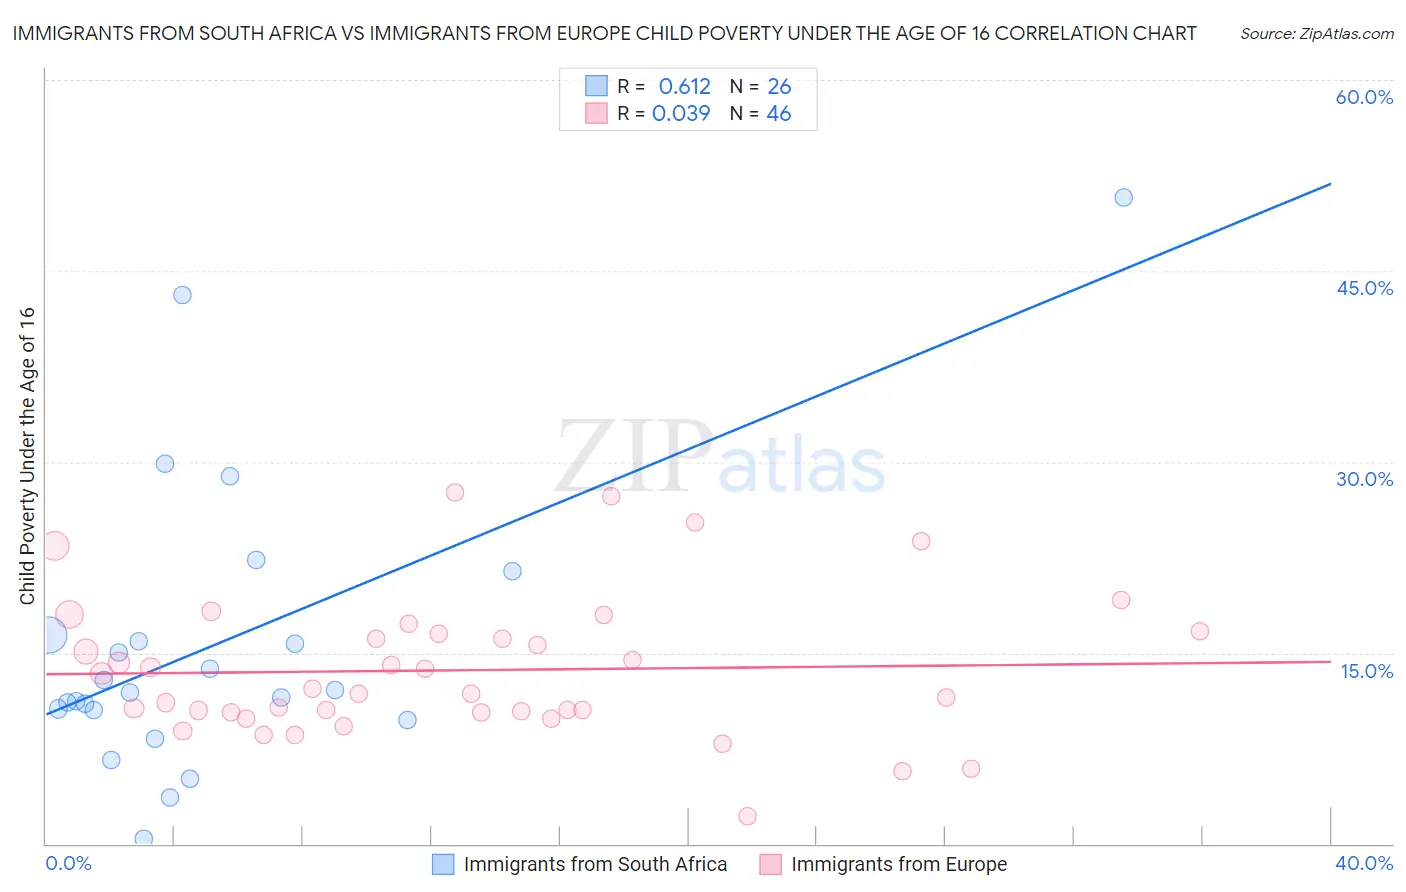 Immigrants from South Africa vs Immigrants from Europe Child Poverty Under the Age of 16